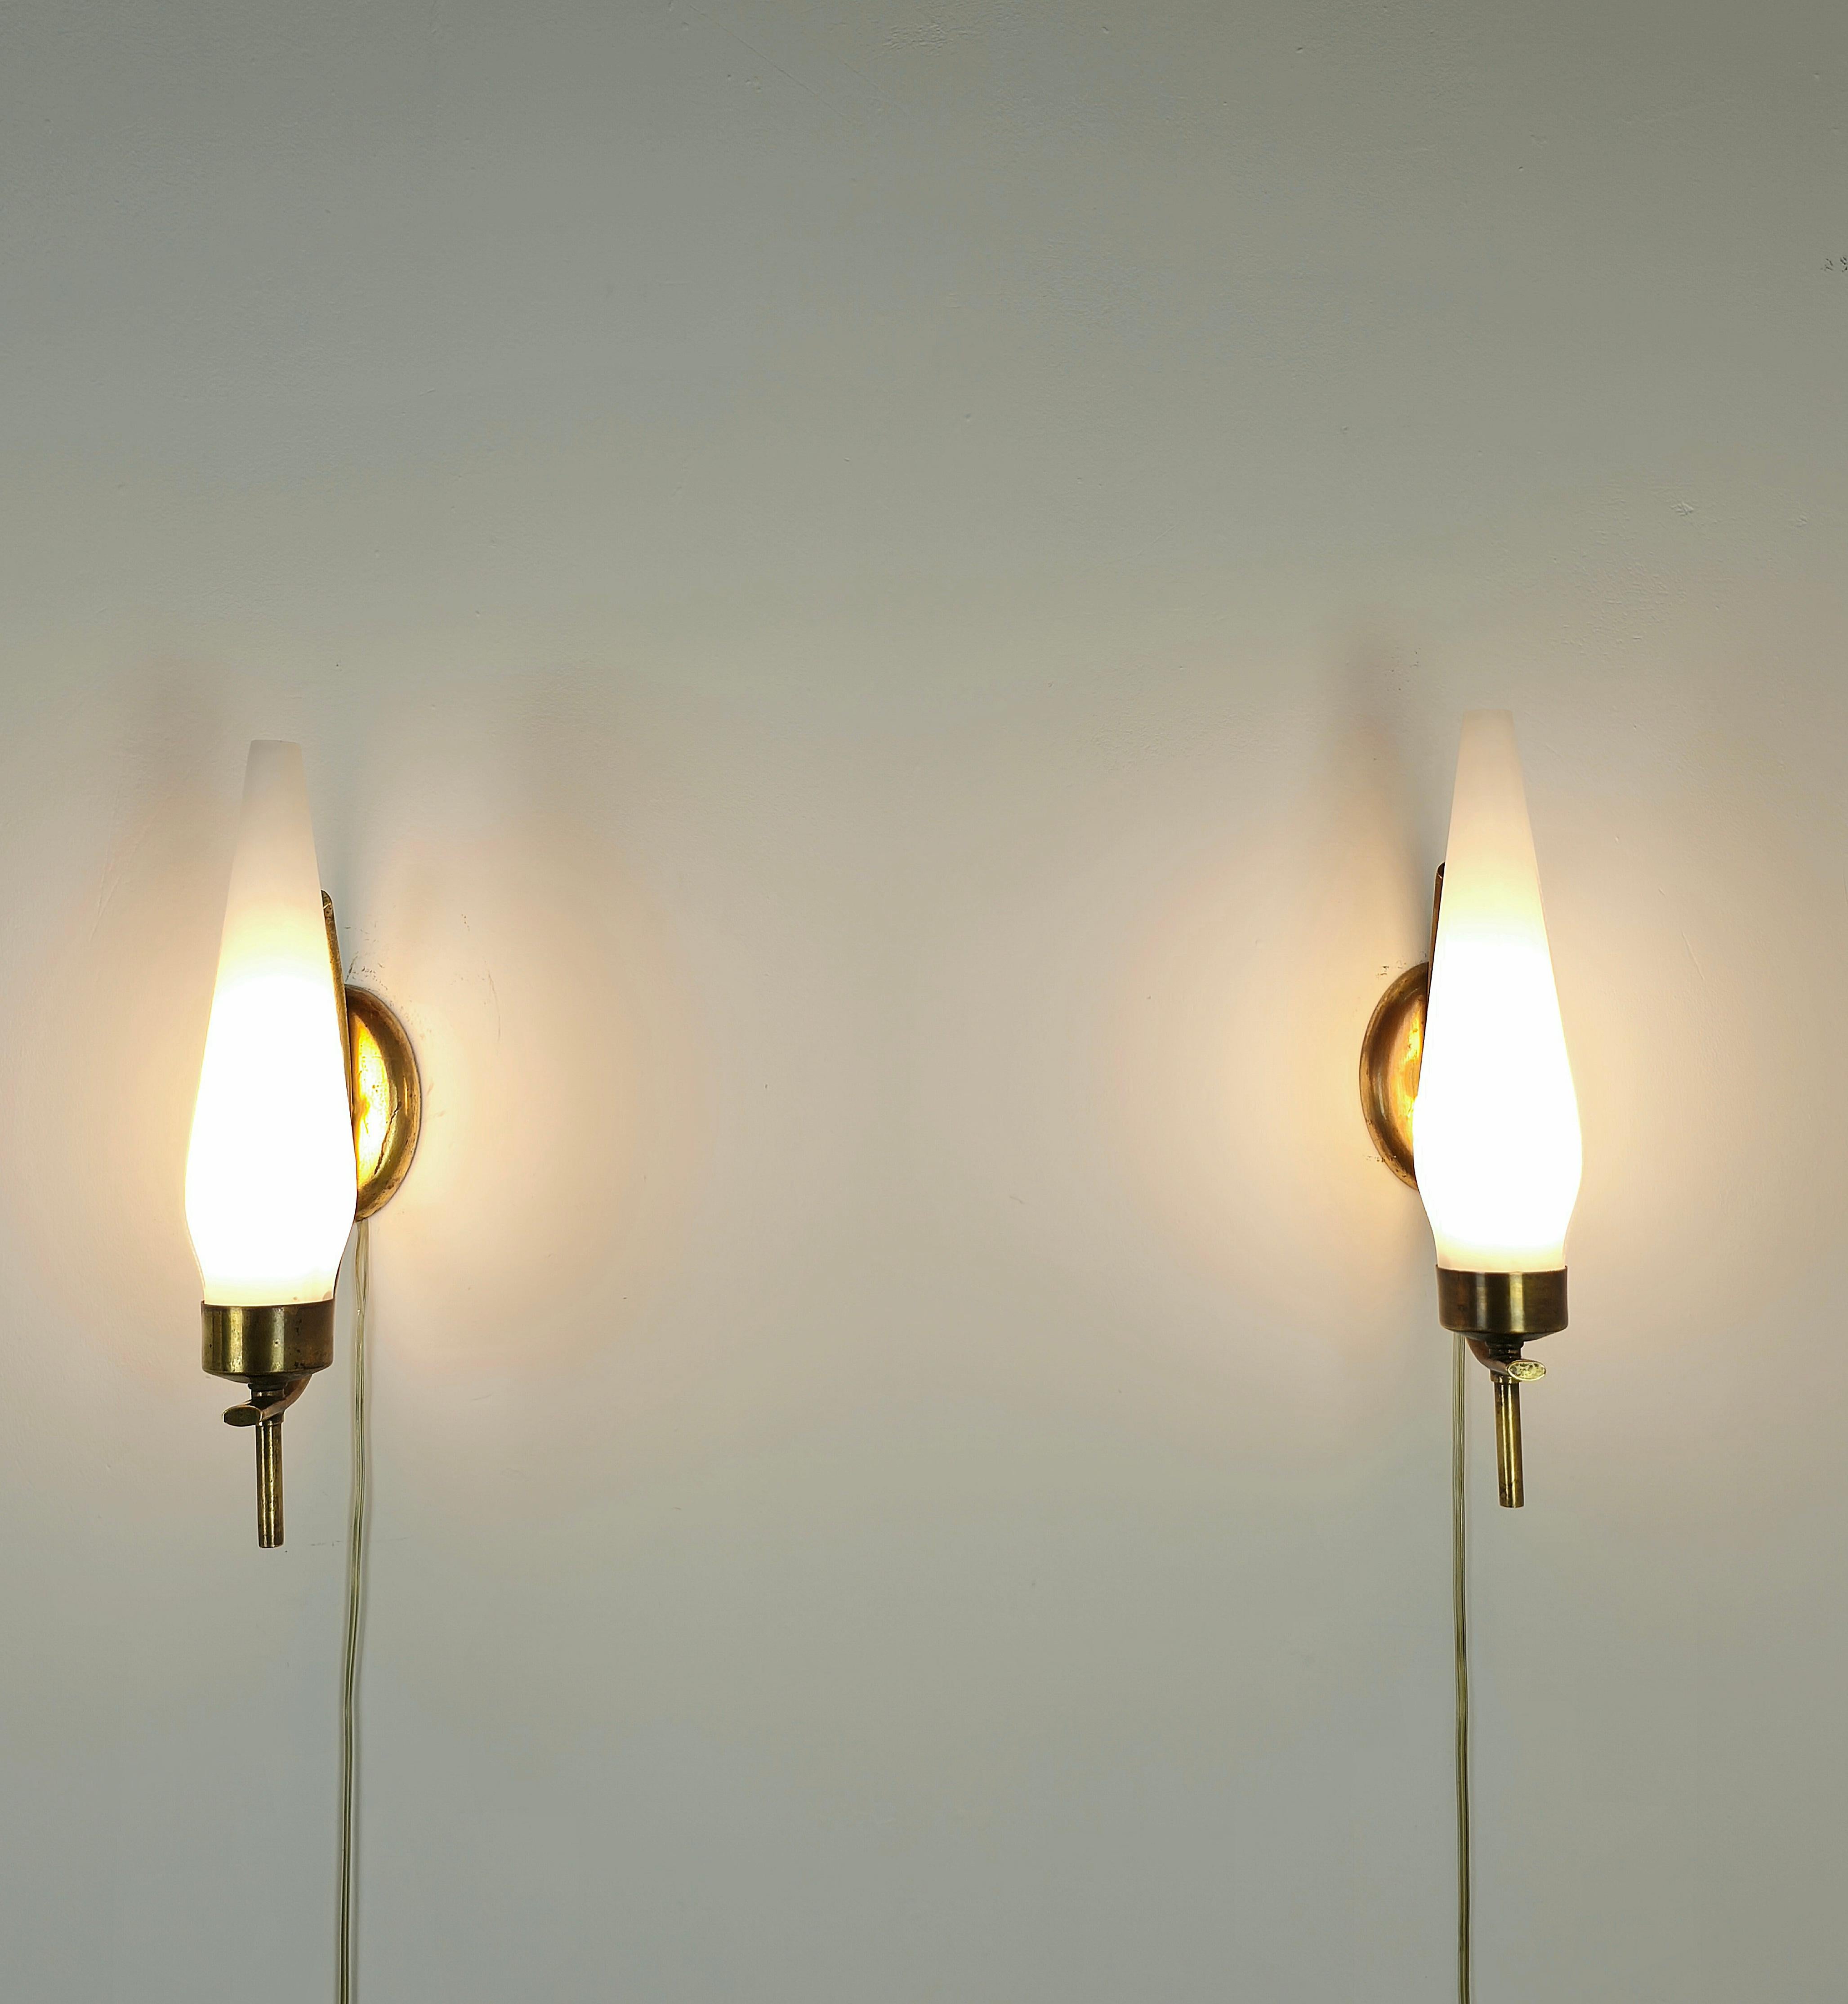 Pair of Wall Lights Sconces Brass Opaline Glass Midcentury Italian Design 1960s  For Sale 5